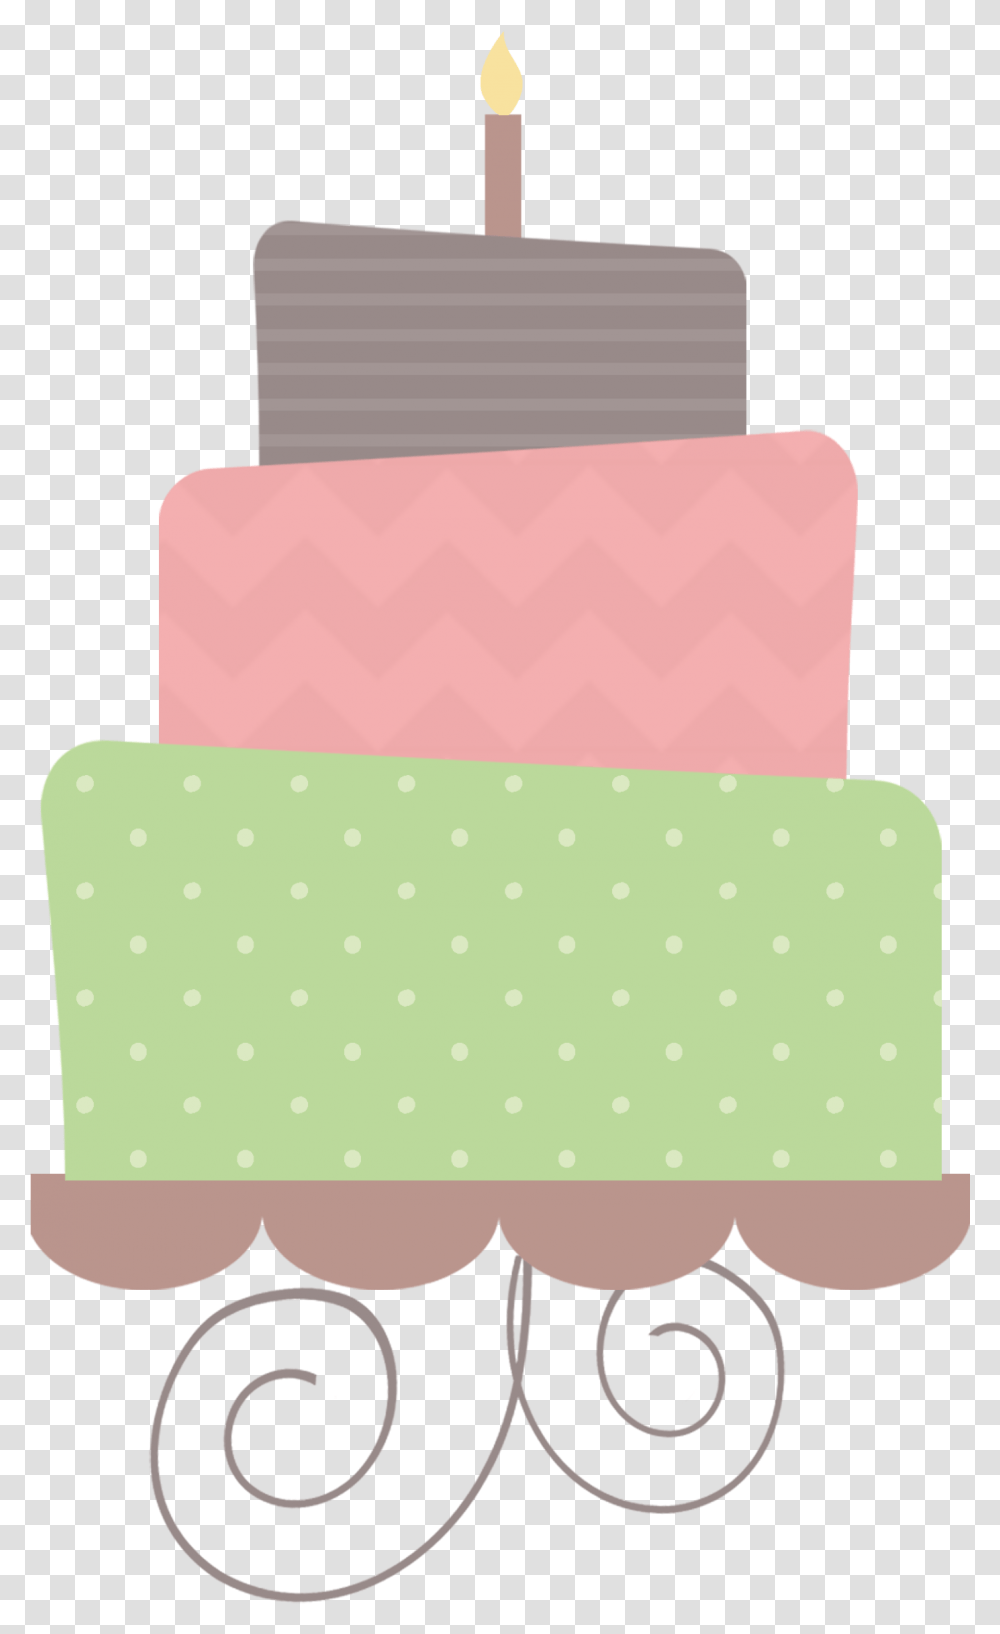 Download For Free Cake In High Resolution Birthday Cake Clipart Printable, Texture, Cushion, Dessert, Food Transparent Png